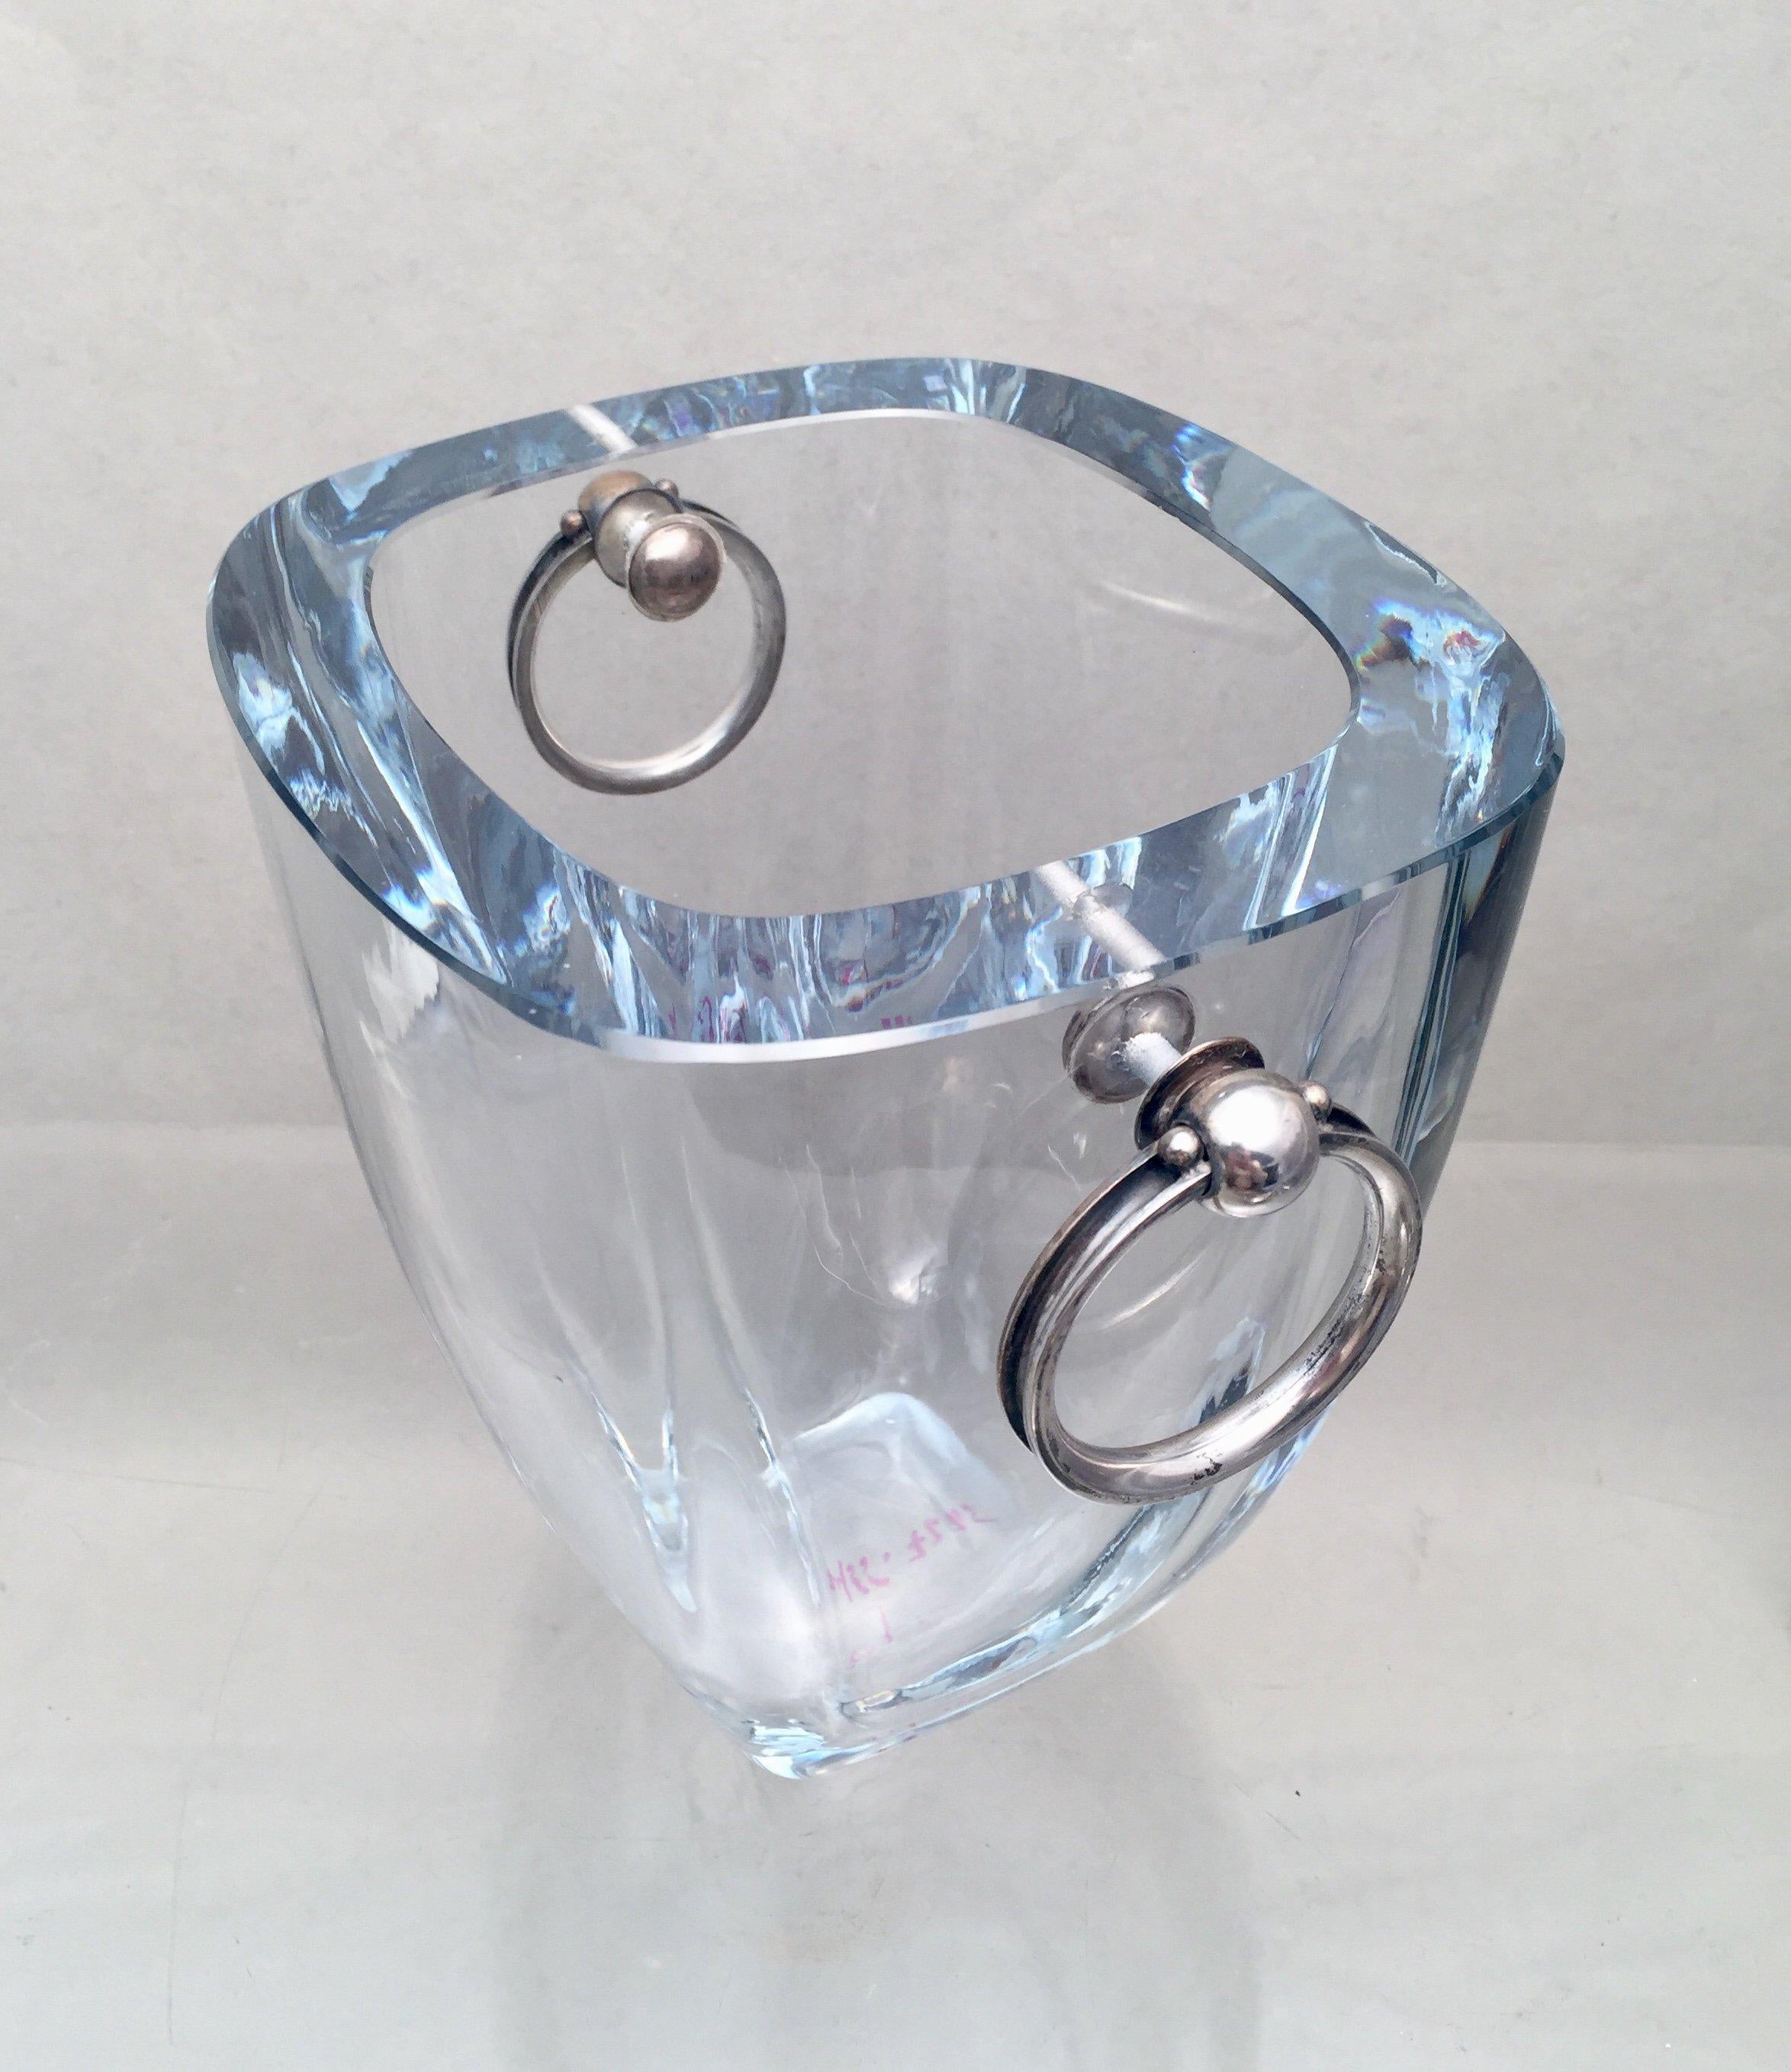 Beautiful crystal ice bucket with a slight blue hue and sterling silver circular handles by Dansk Guldsmede Handvaerk. Bucket measures 6 1/4 inches tall and 6 1/2 inches from handle to handle. Bearing hallmarks. Perfect for bar use. 

